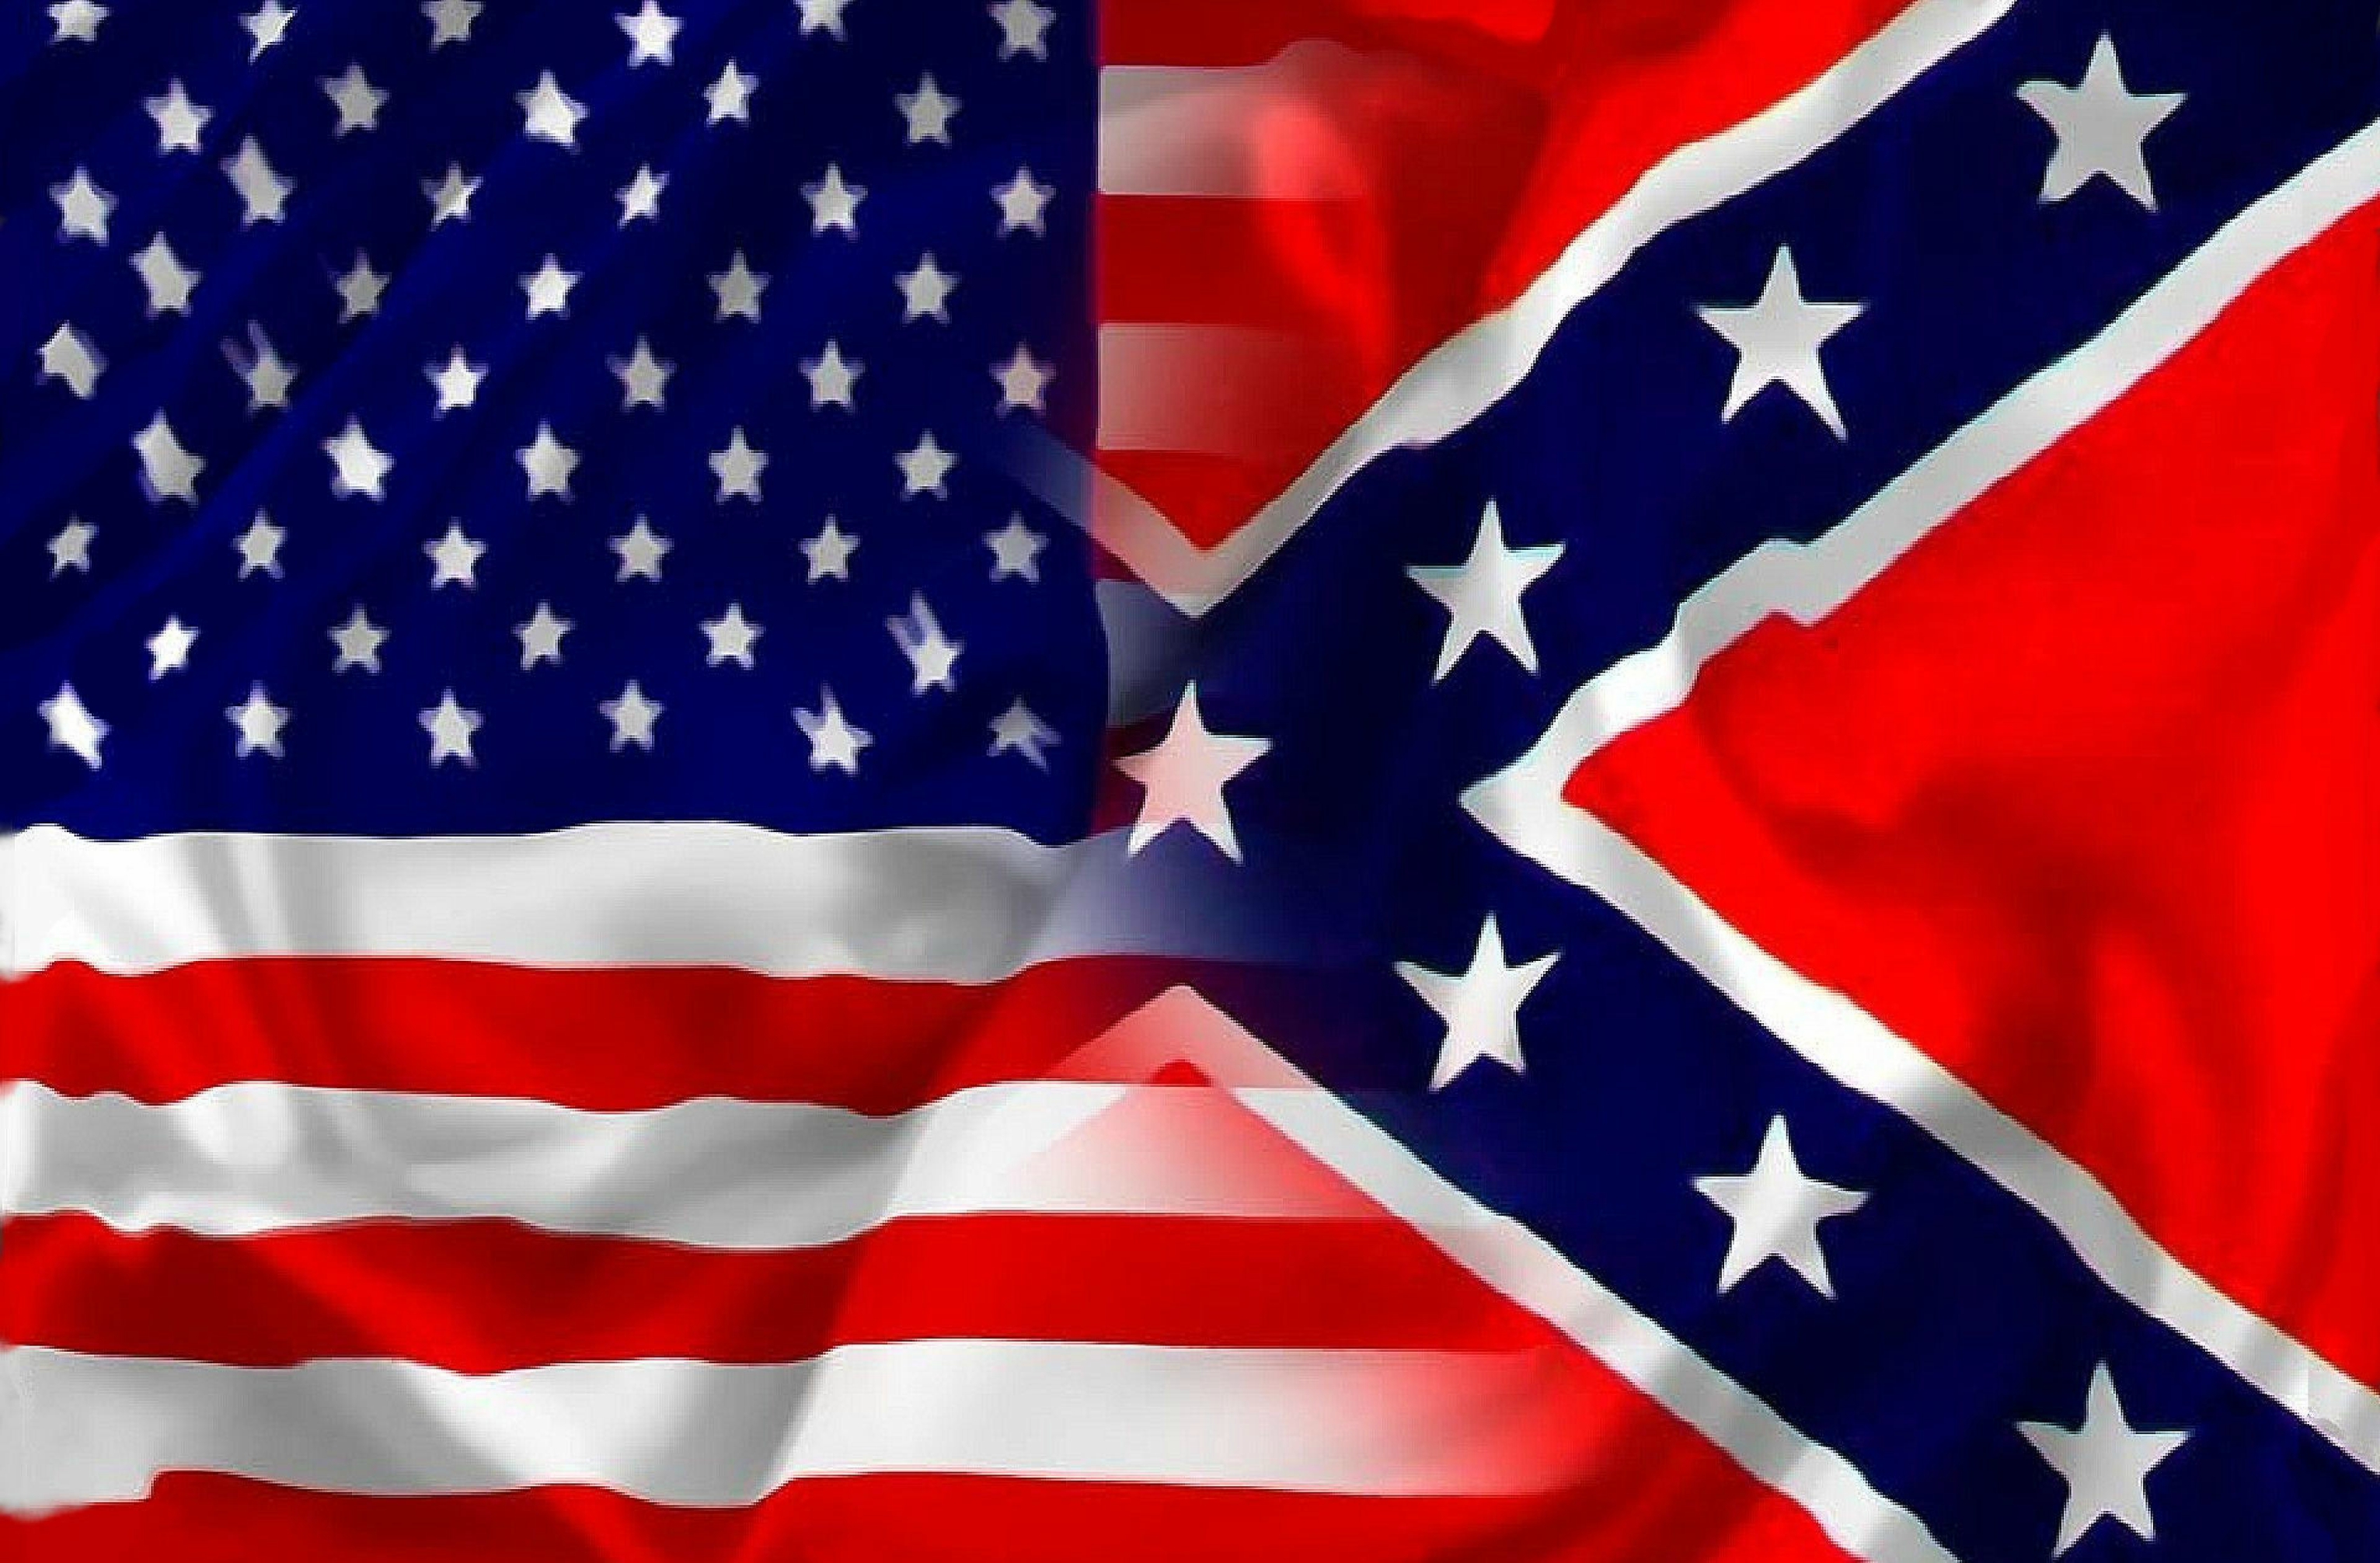 American Confederate Flag Image - ID: 9448 - Image Abyss